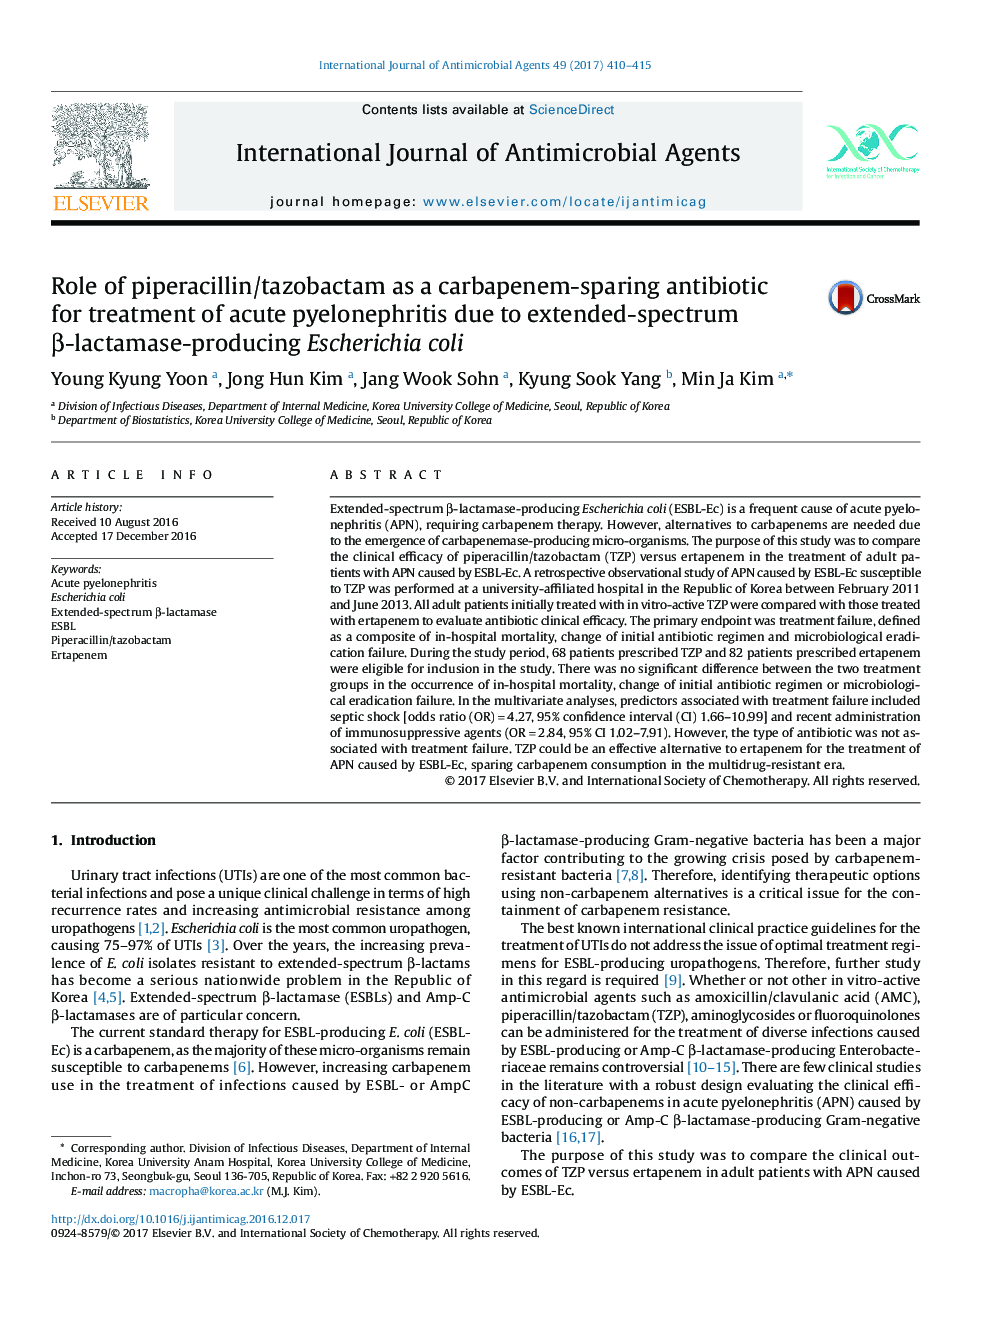 Role of piperacillin/tazobactam as a carbapenem-sparing antibiotic for treatment of acute pyelonephritis due to extended-spectrum Î²-lactamase-producing Escherichia coli